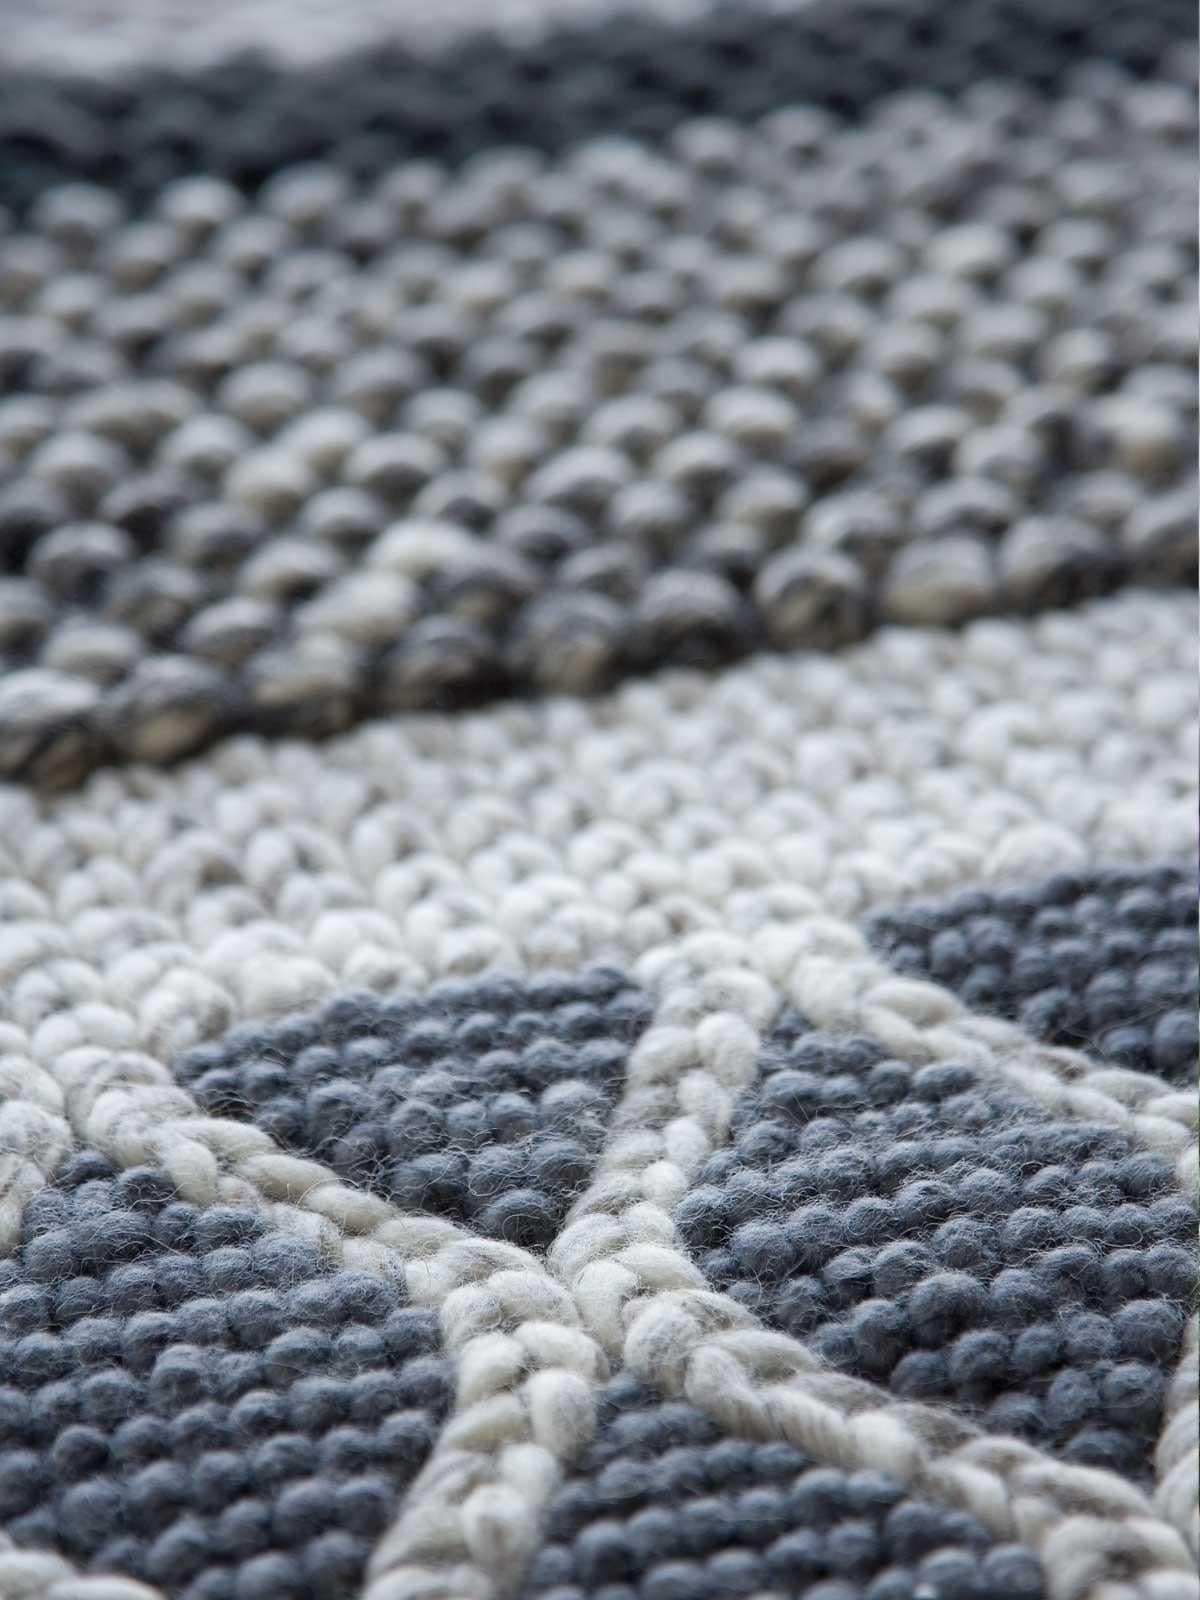 A revolution in the world of rugs called Mangas Original, designed by Patricia Urquiola. The original idea was inspired by the look of hand-knitted sweaters and the result is the most original, attractive rug collection seen in recent times.